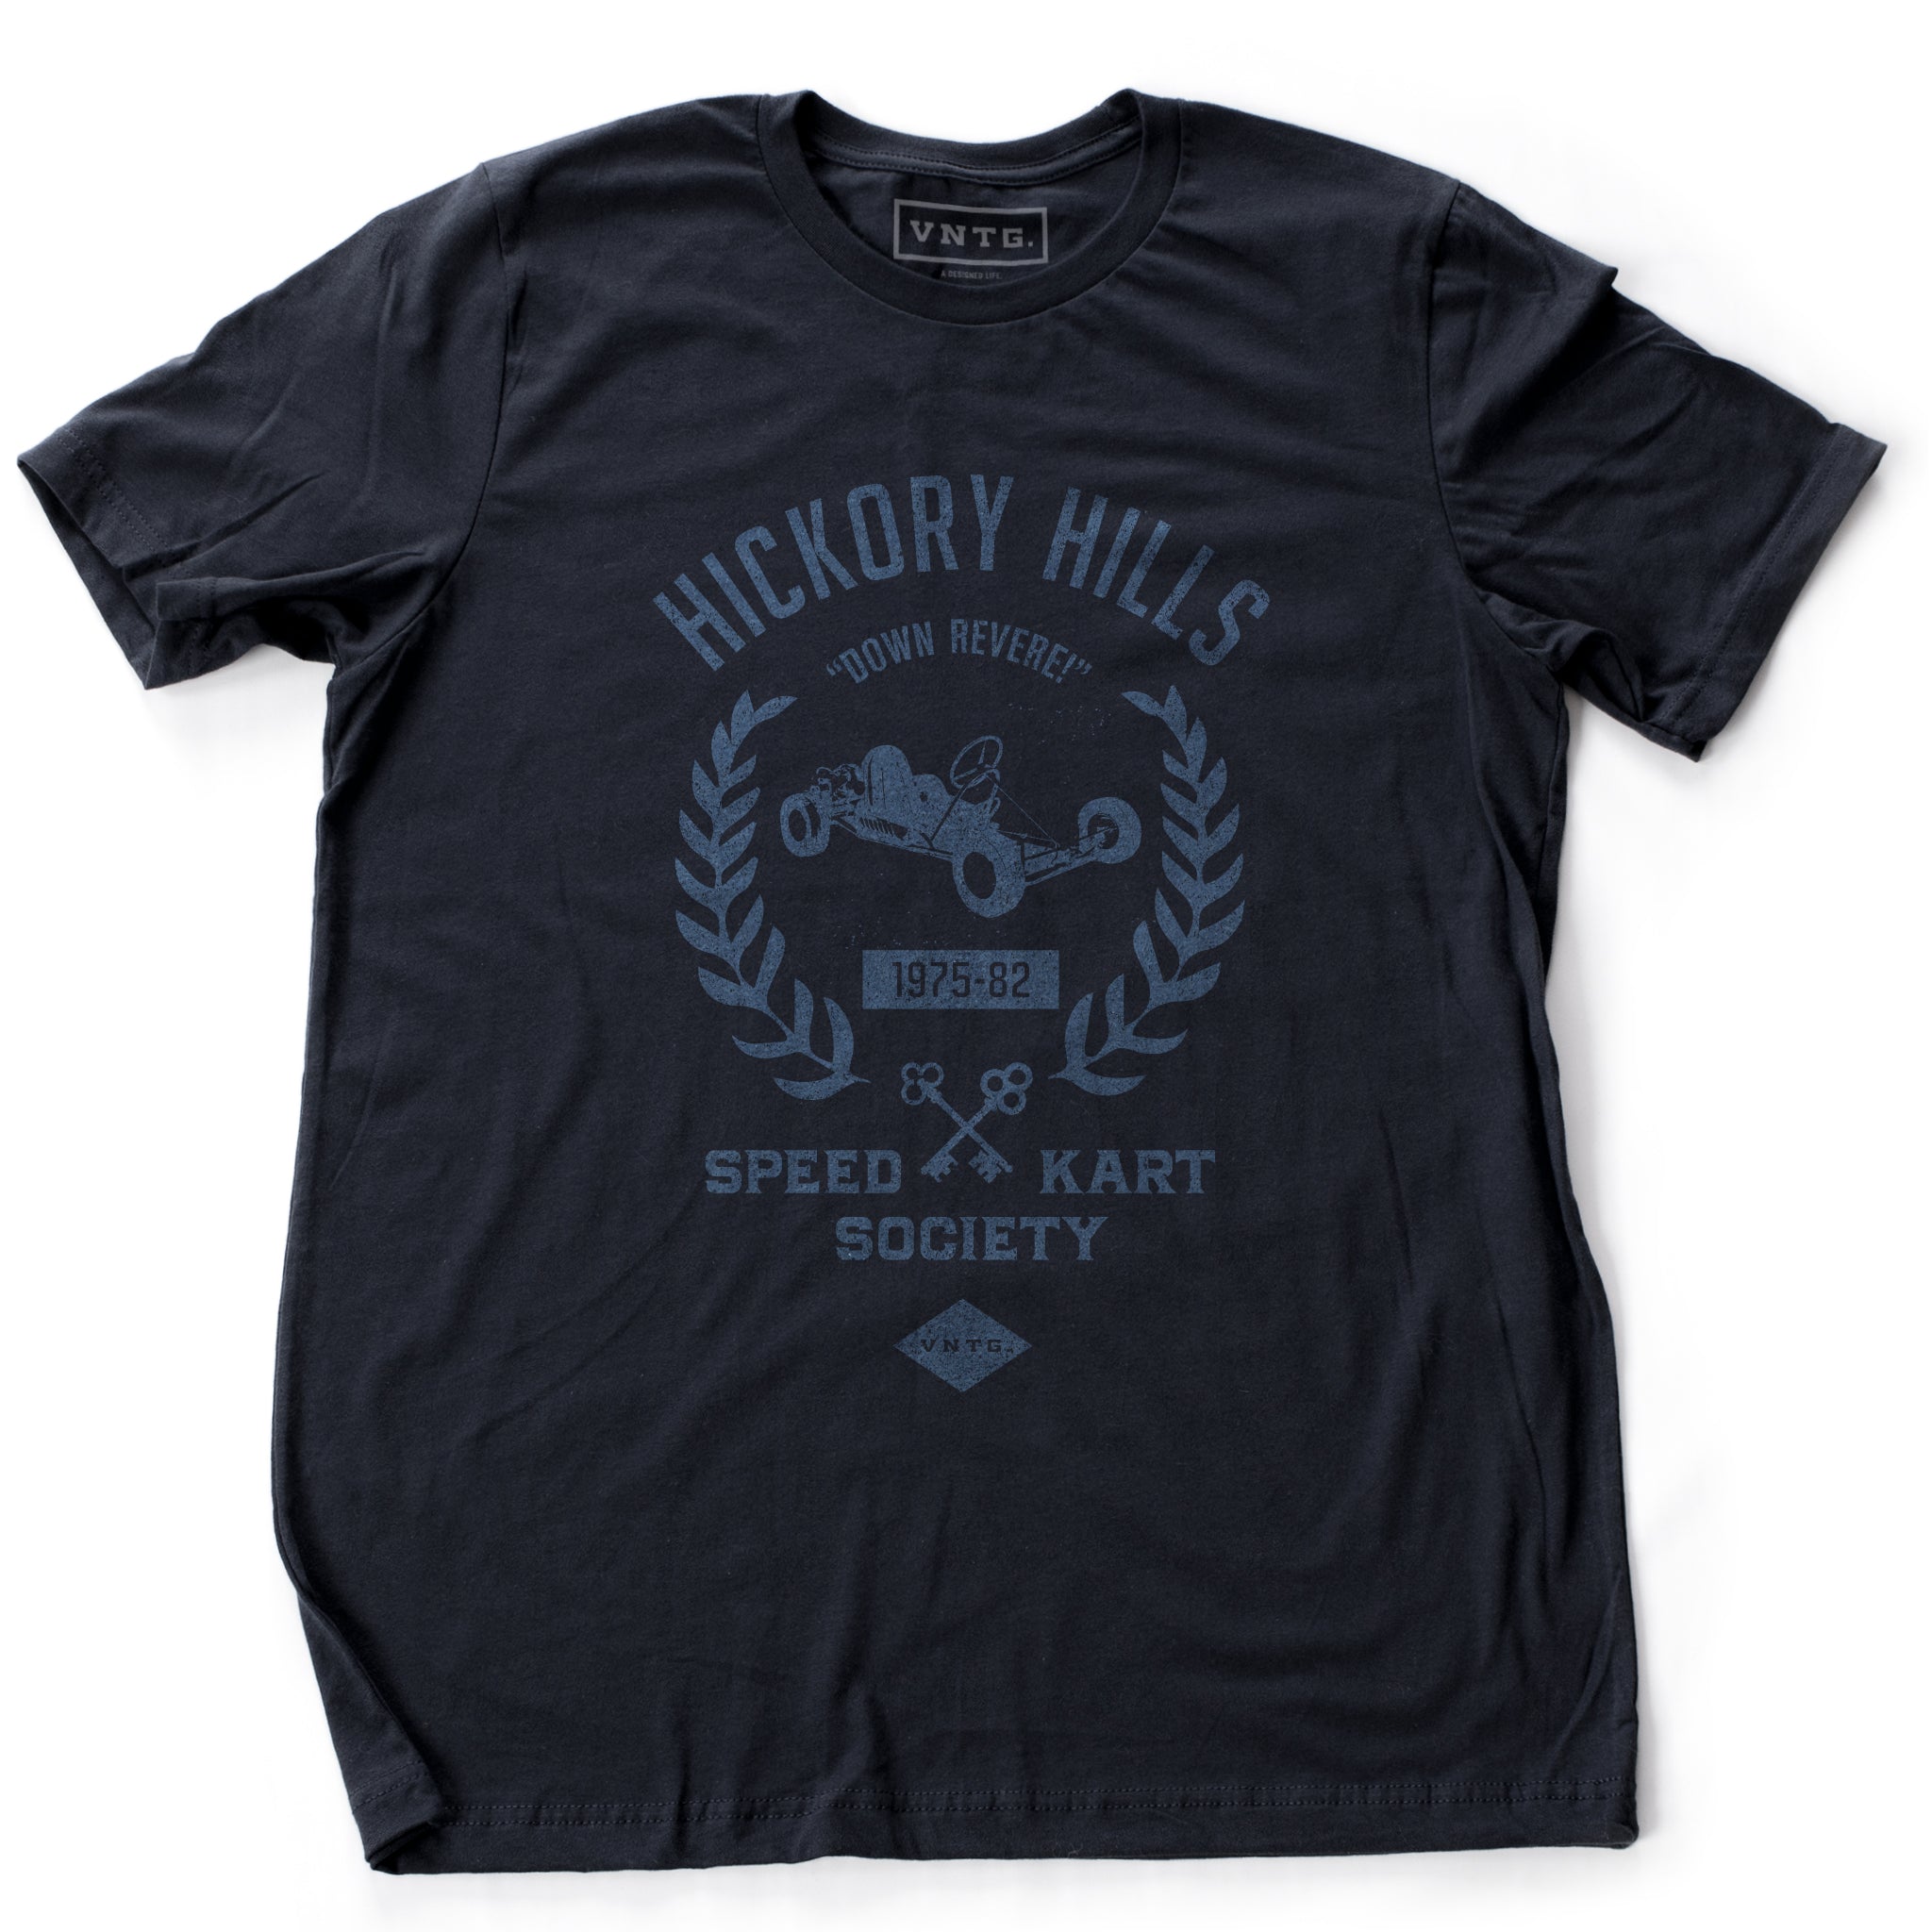 A ‘vintage fiction,’ retro t-shirt in Navy Blue, picturing a go-kart, promoting a small town racing league from 1975-1982 in Hockessin, Delaware. Inspired by the films of Wes Anderson. By fashion brand VNTG., from wolfsaint.net